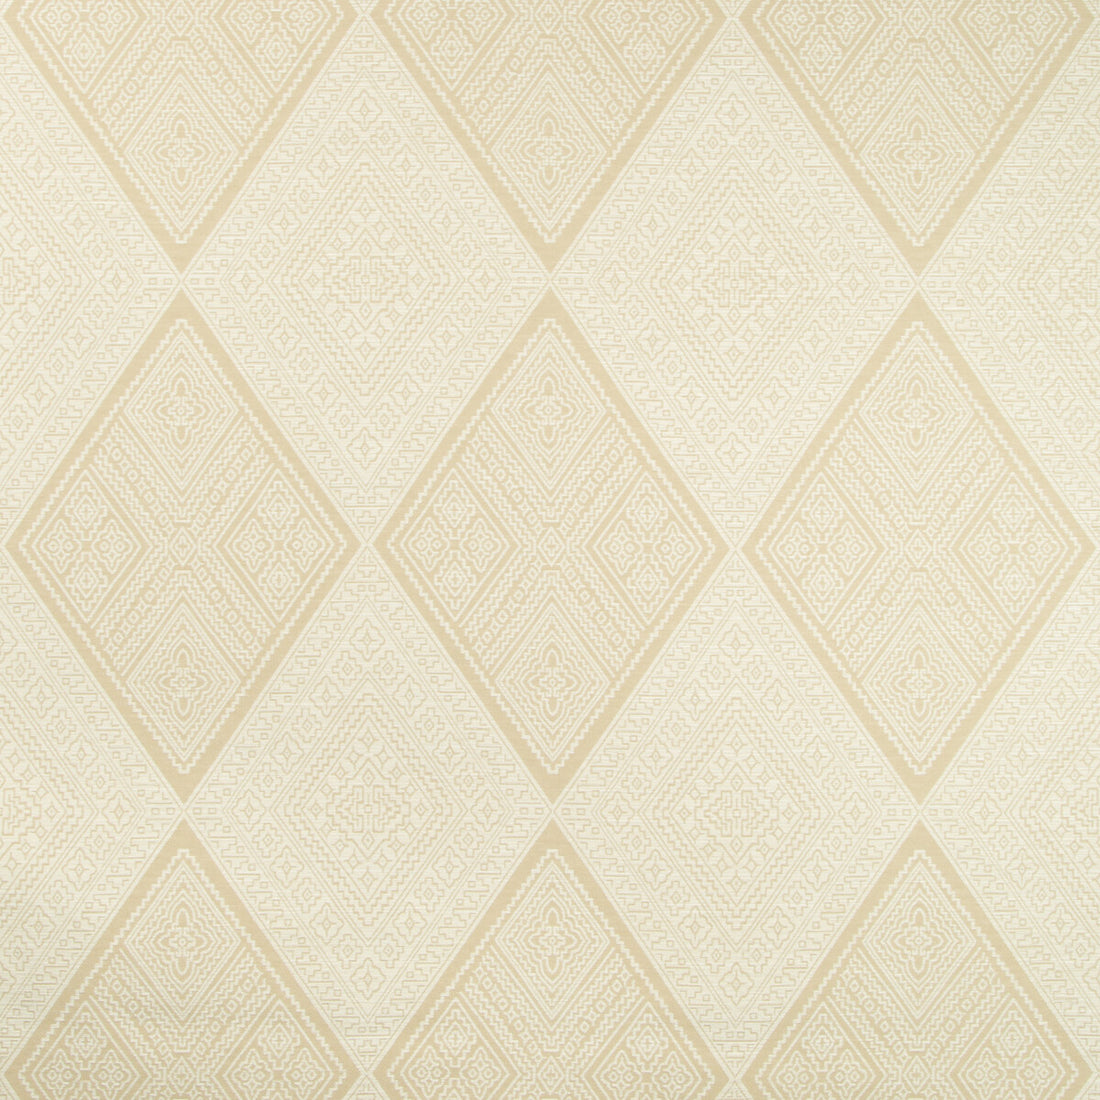 Kravet Design fabric in 35000-116 color - pattern 35000.116.0 - by Kravet Design in the Performance Crypton Home collection